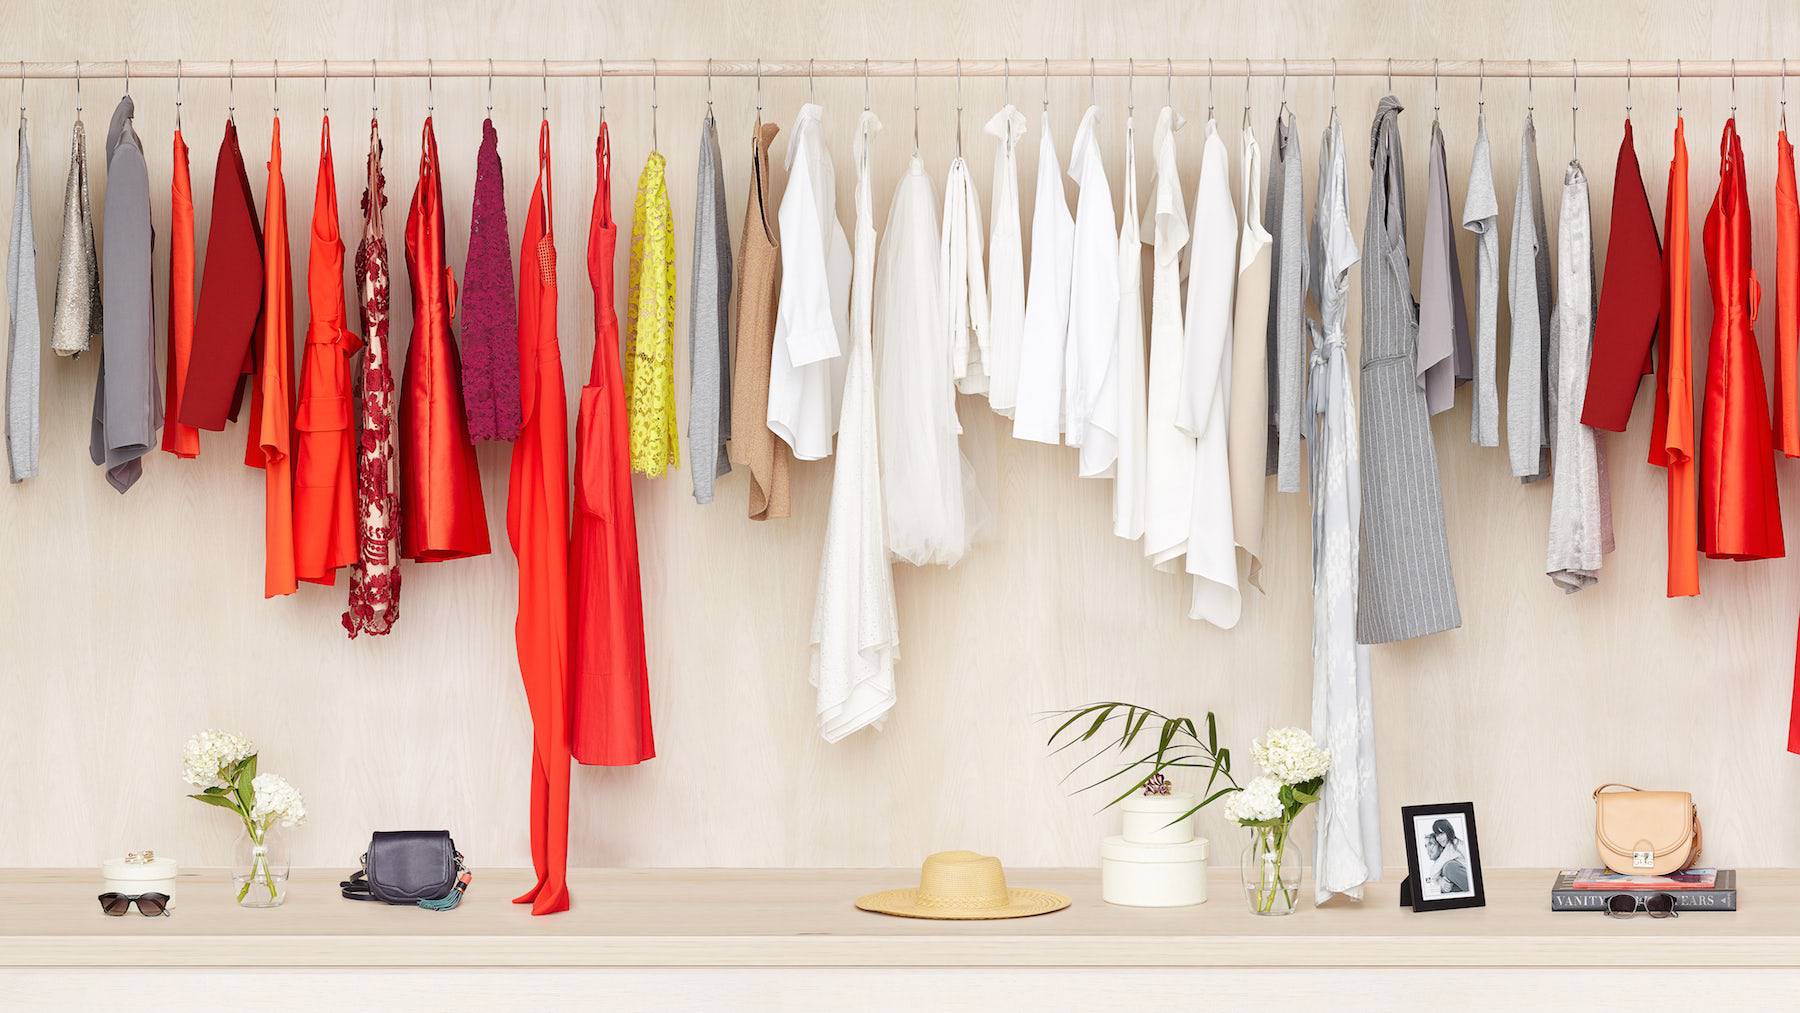 Rent the Runway offers customers access to an "unlimited" closet.